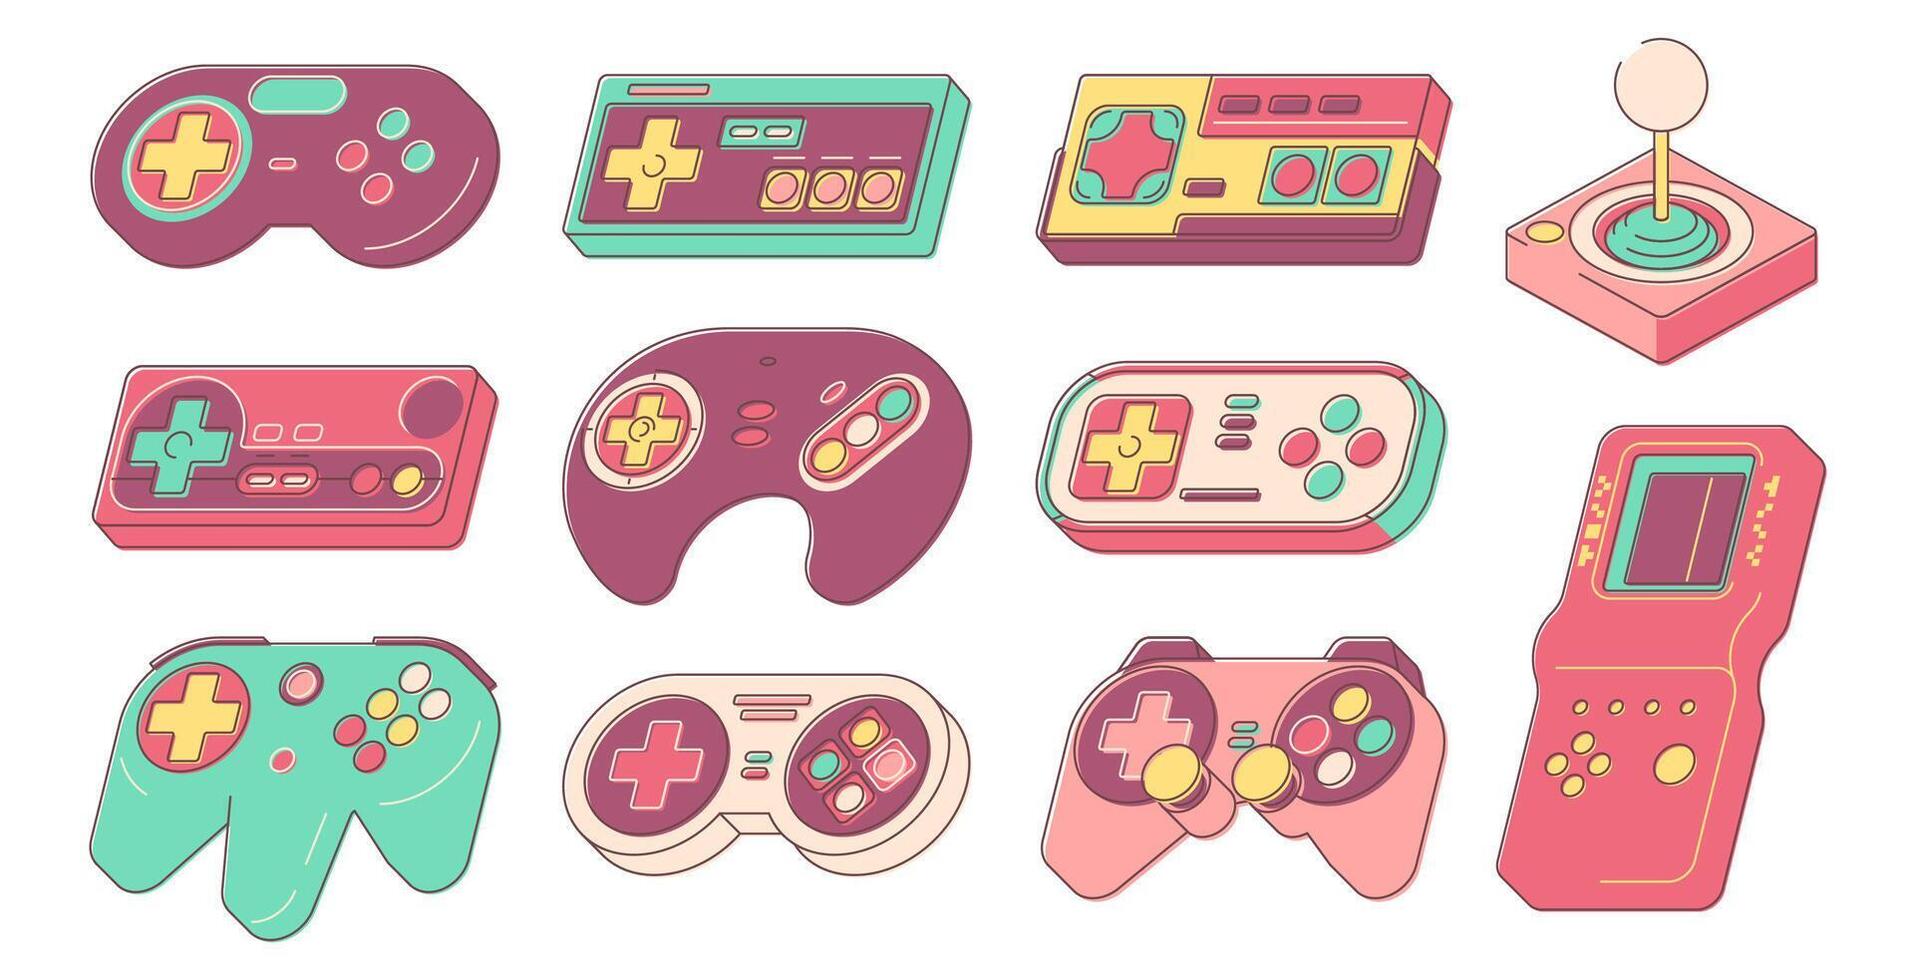 Retro gamepads. Old analog sticks for classic arcade games, 90s portable devices for gamer entertainment. Vector collection